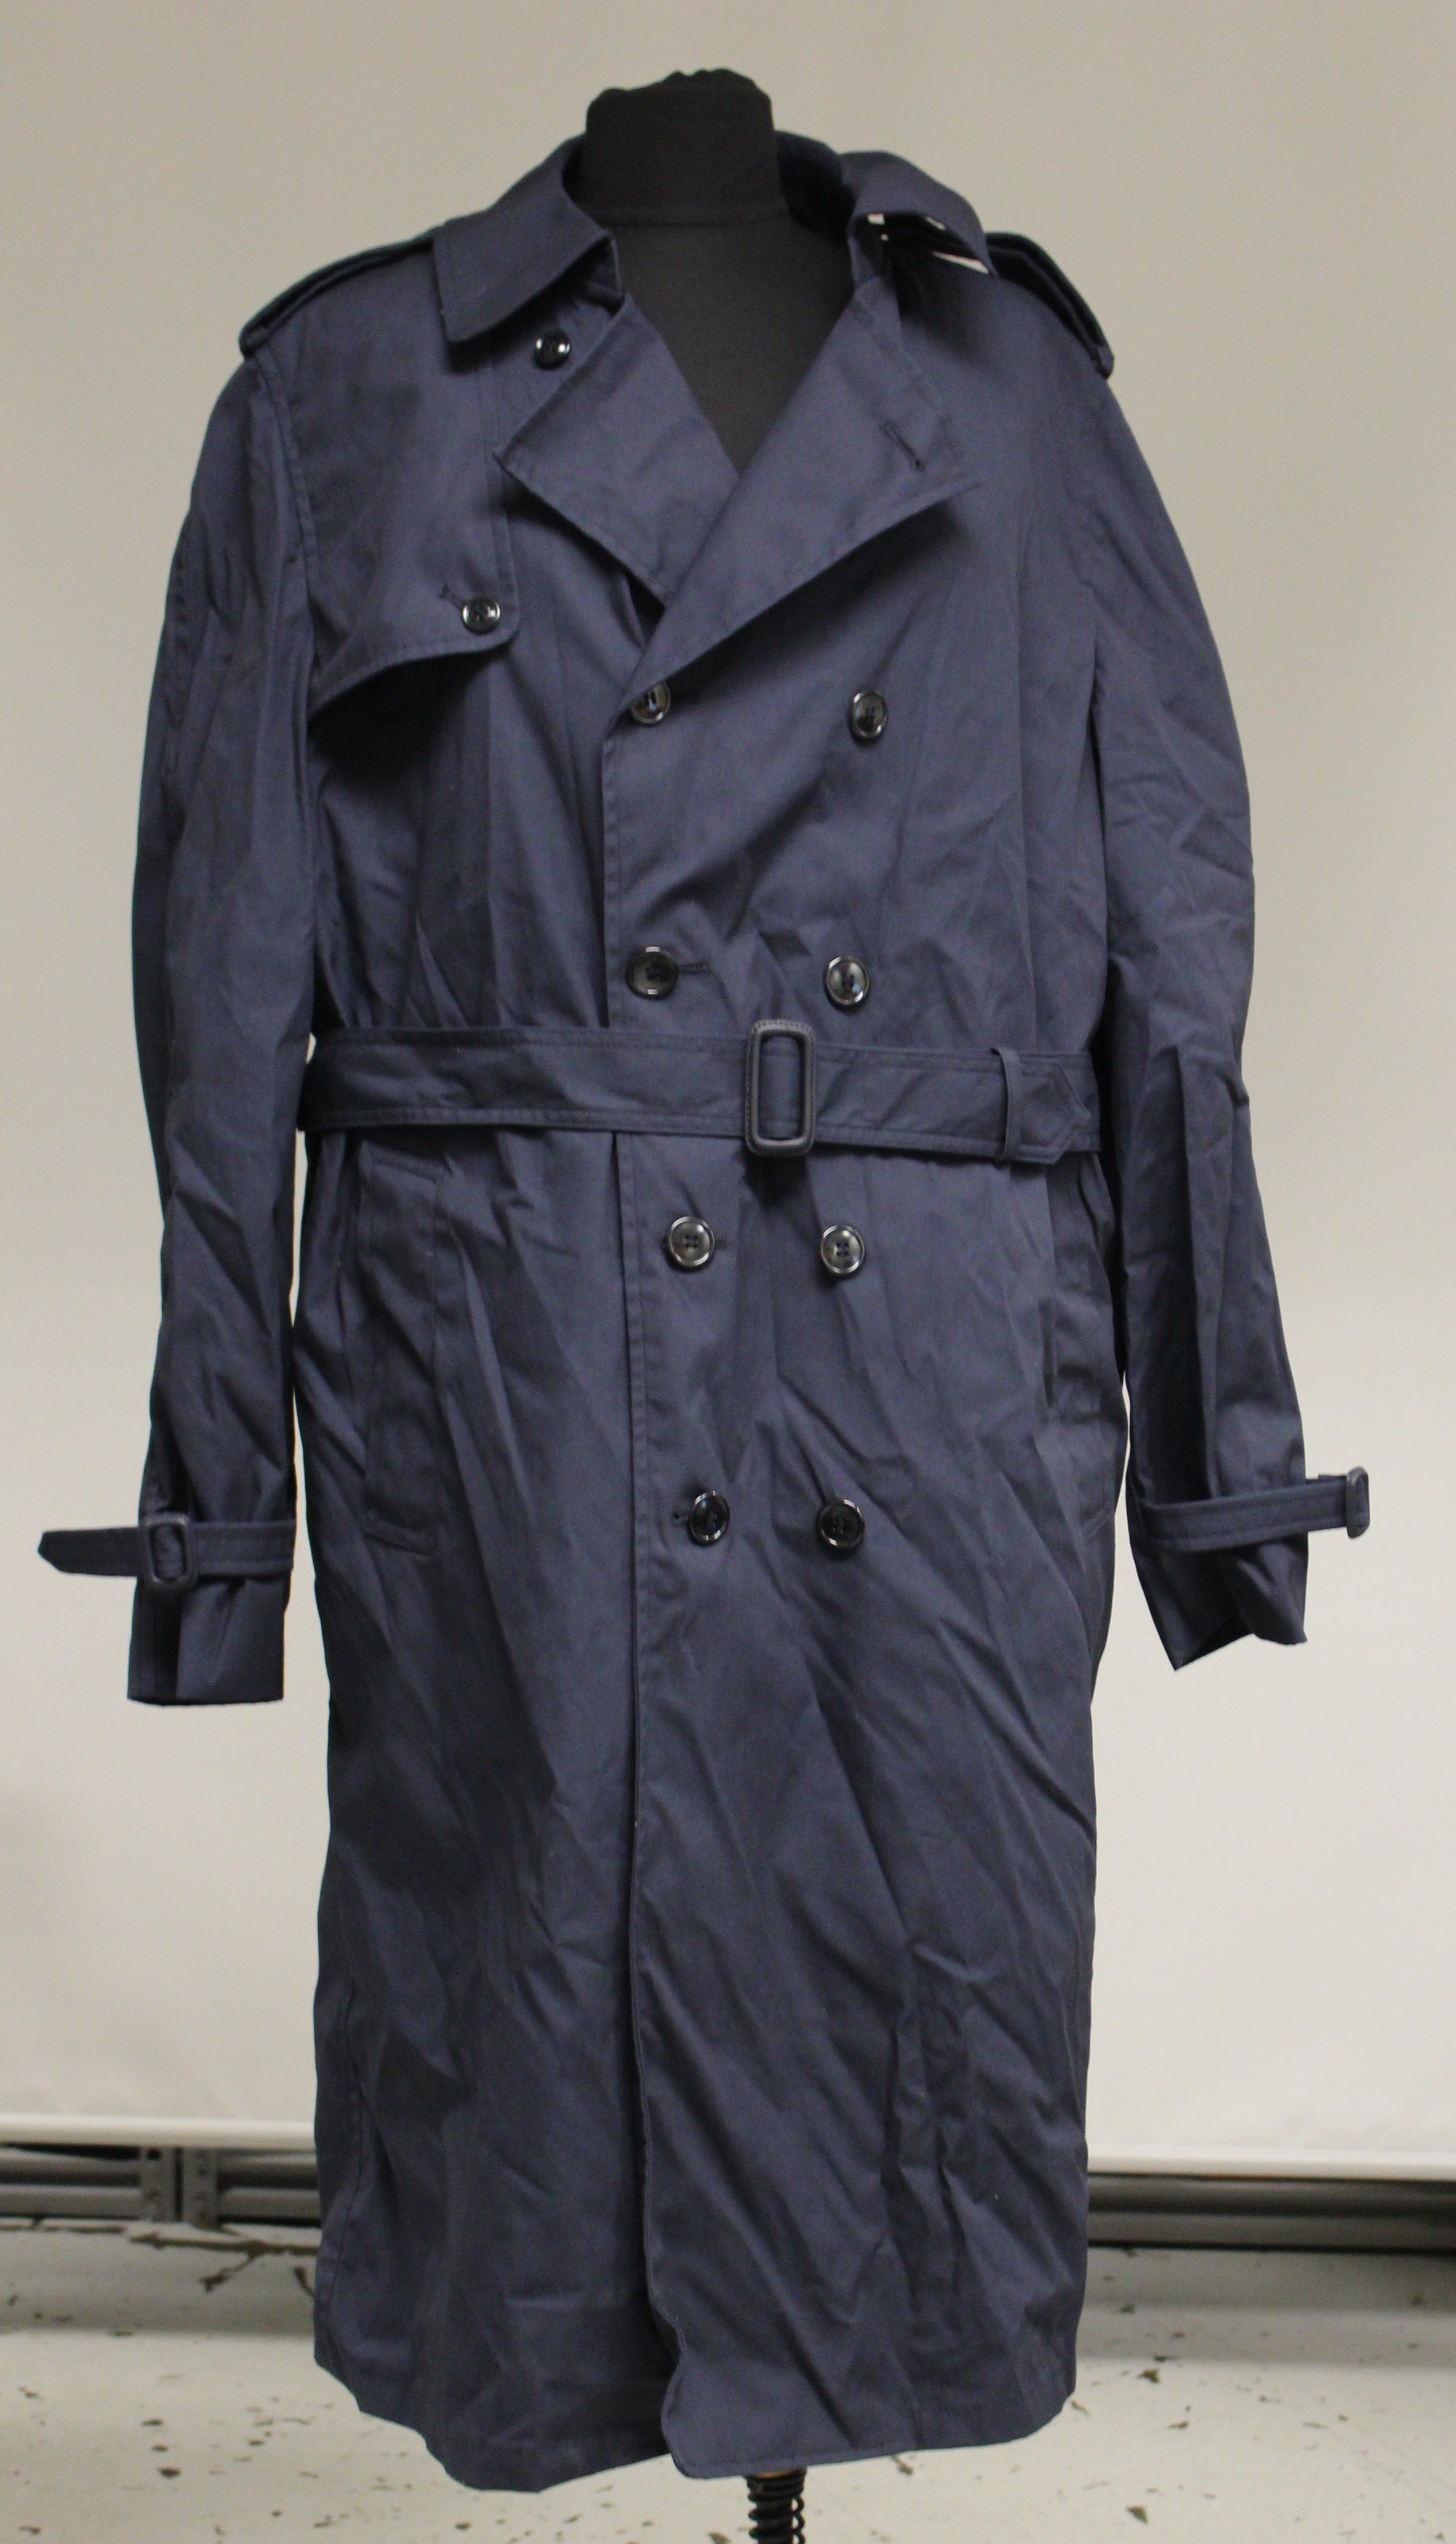 US Navy Blue Man's All Weather Coat - 8405-01-175-2299 - 44XL 